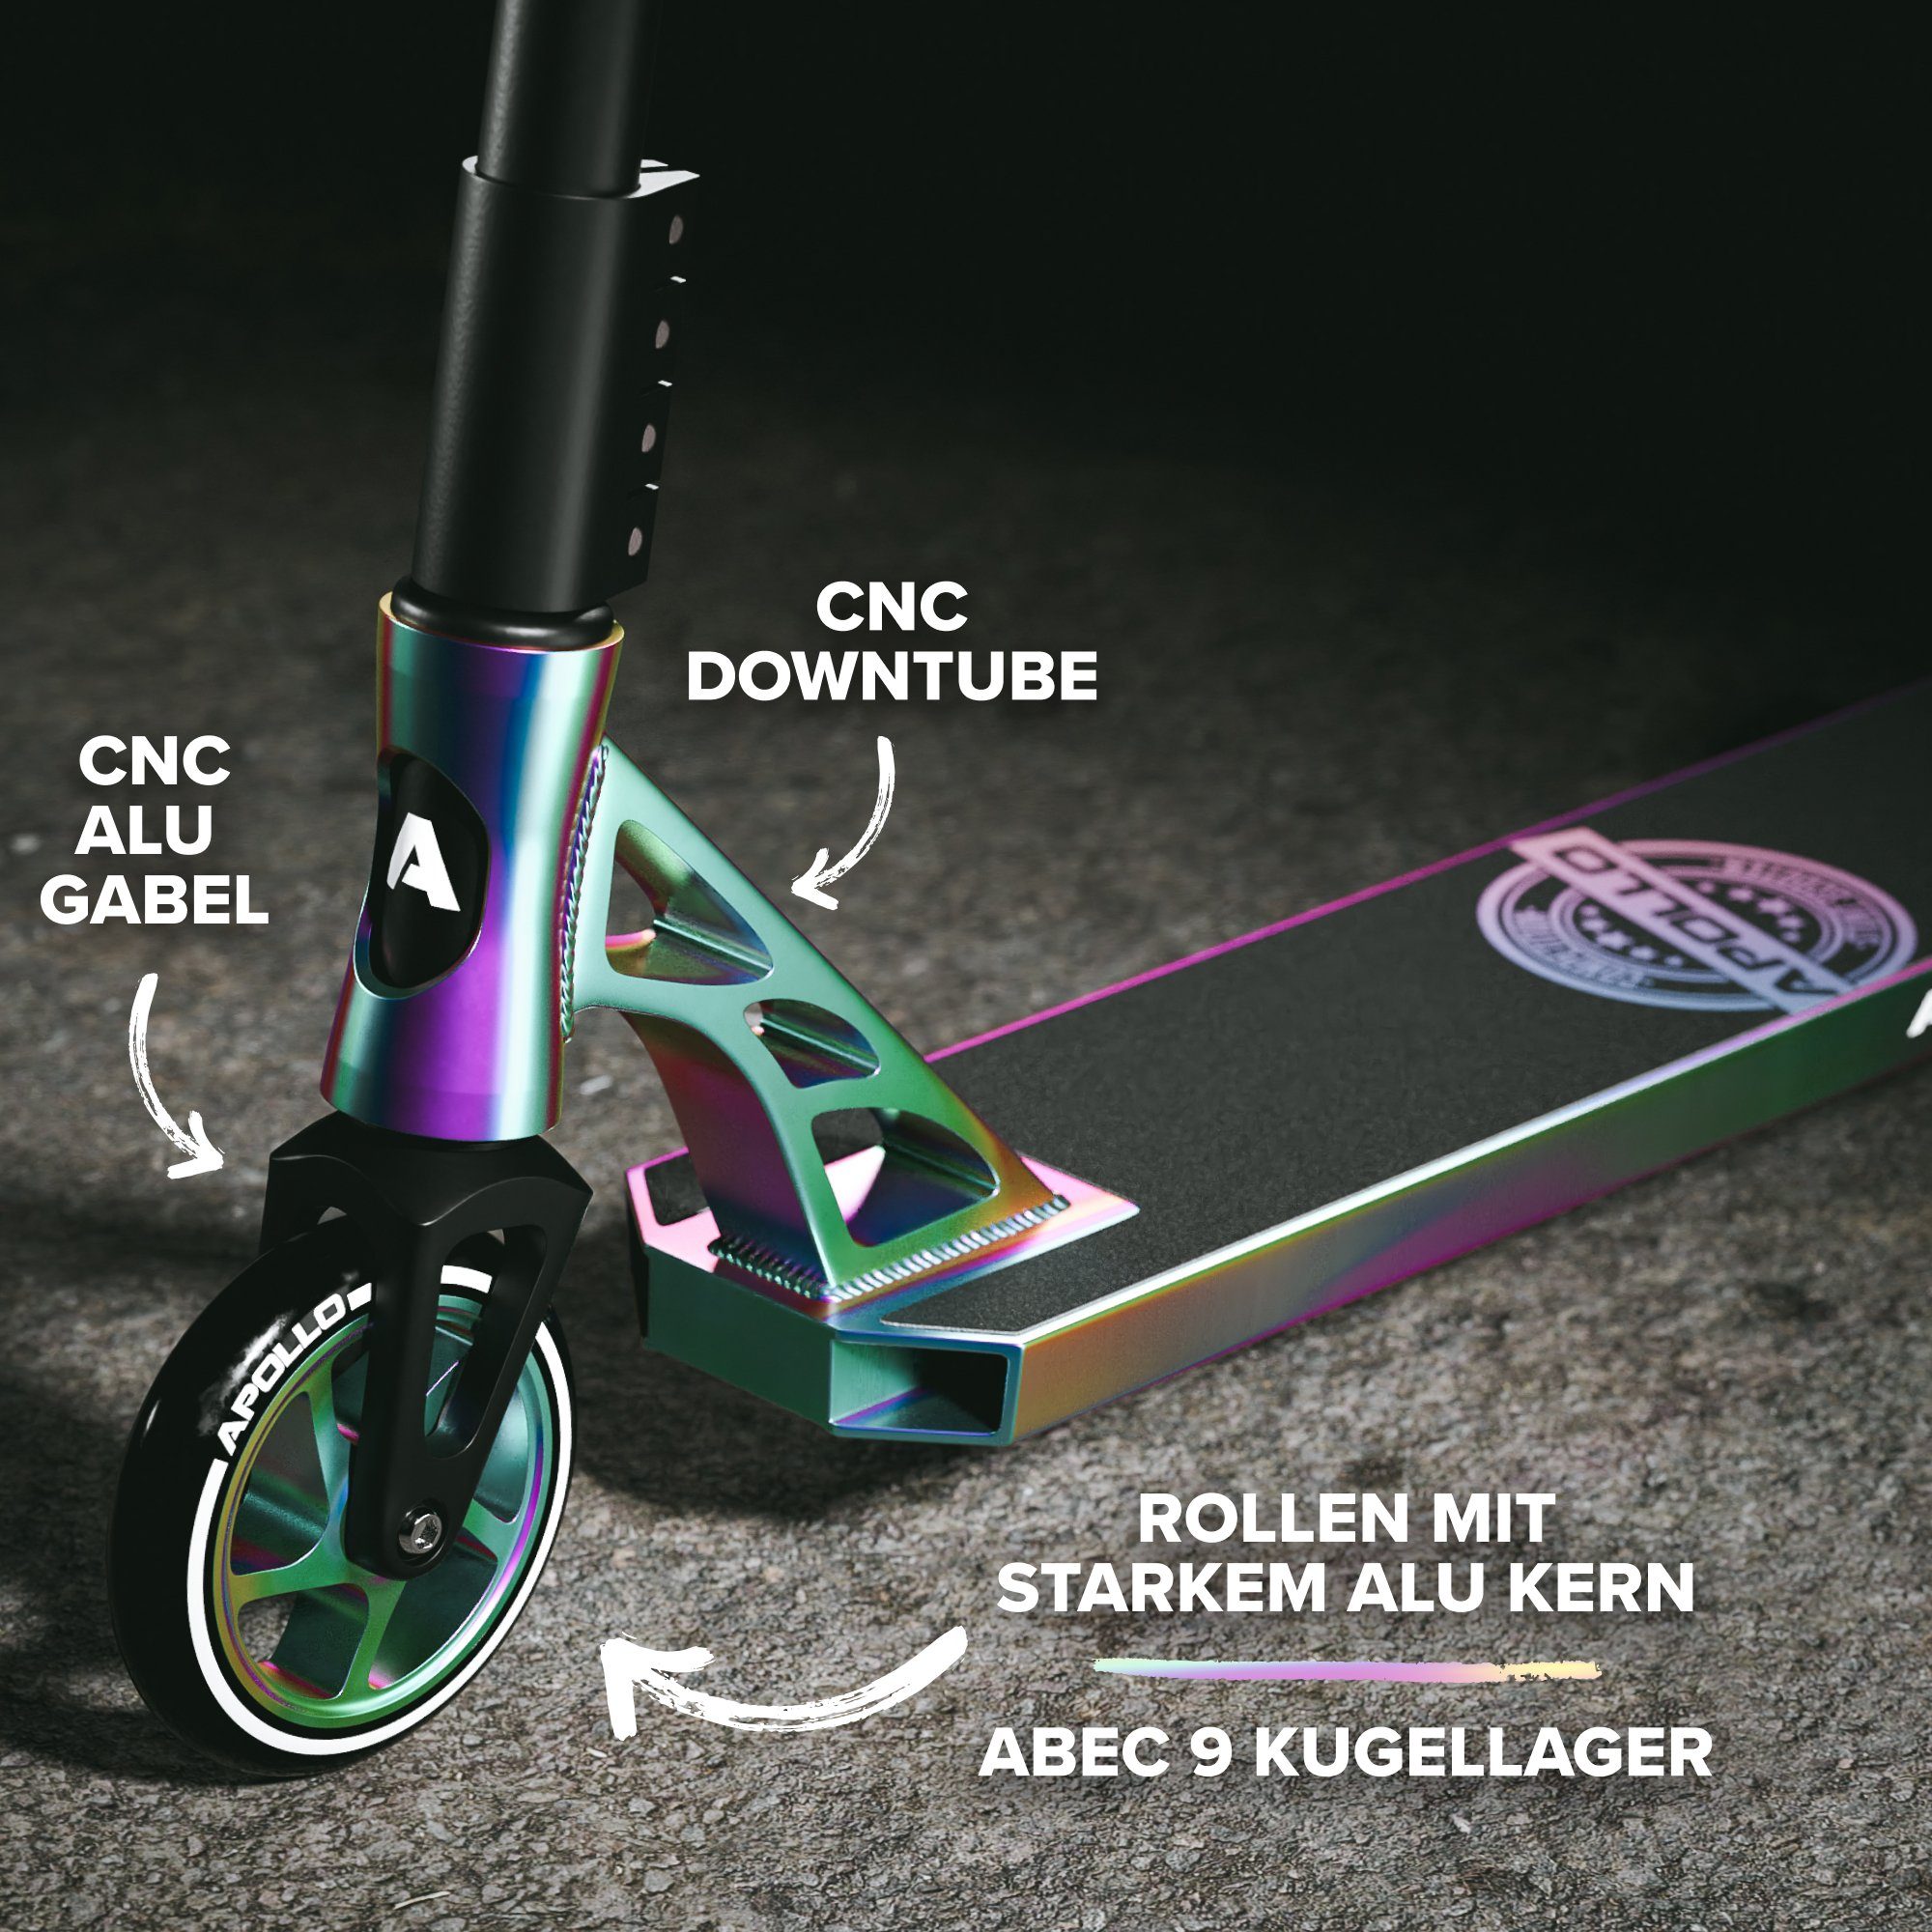 Apollo High Pro Competition Scooter Genesis X Stuntscooter Roller -, Rainbow End Stunt